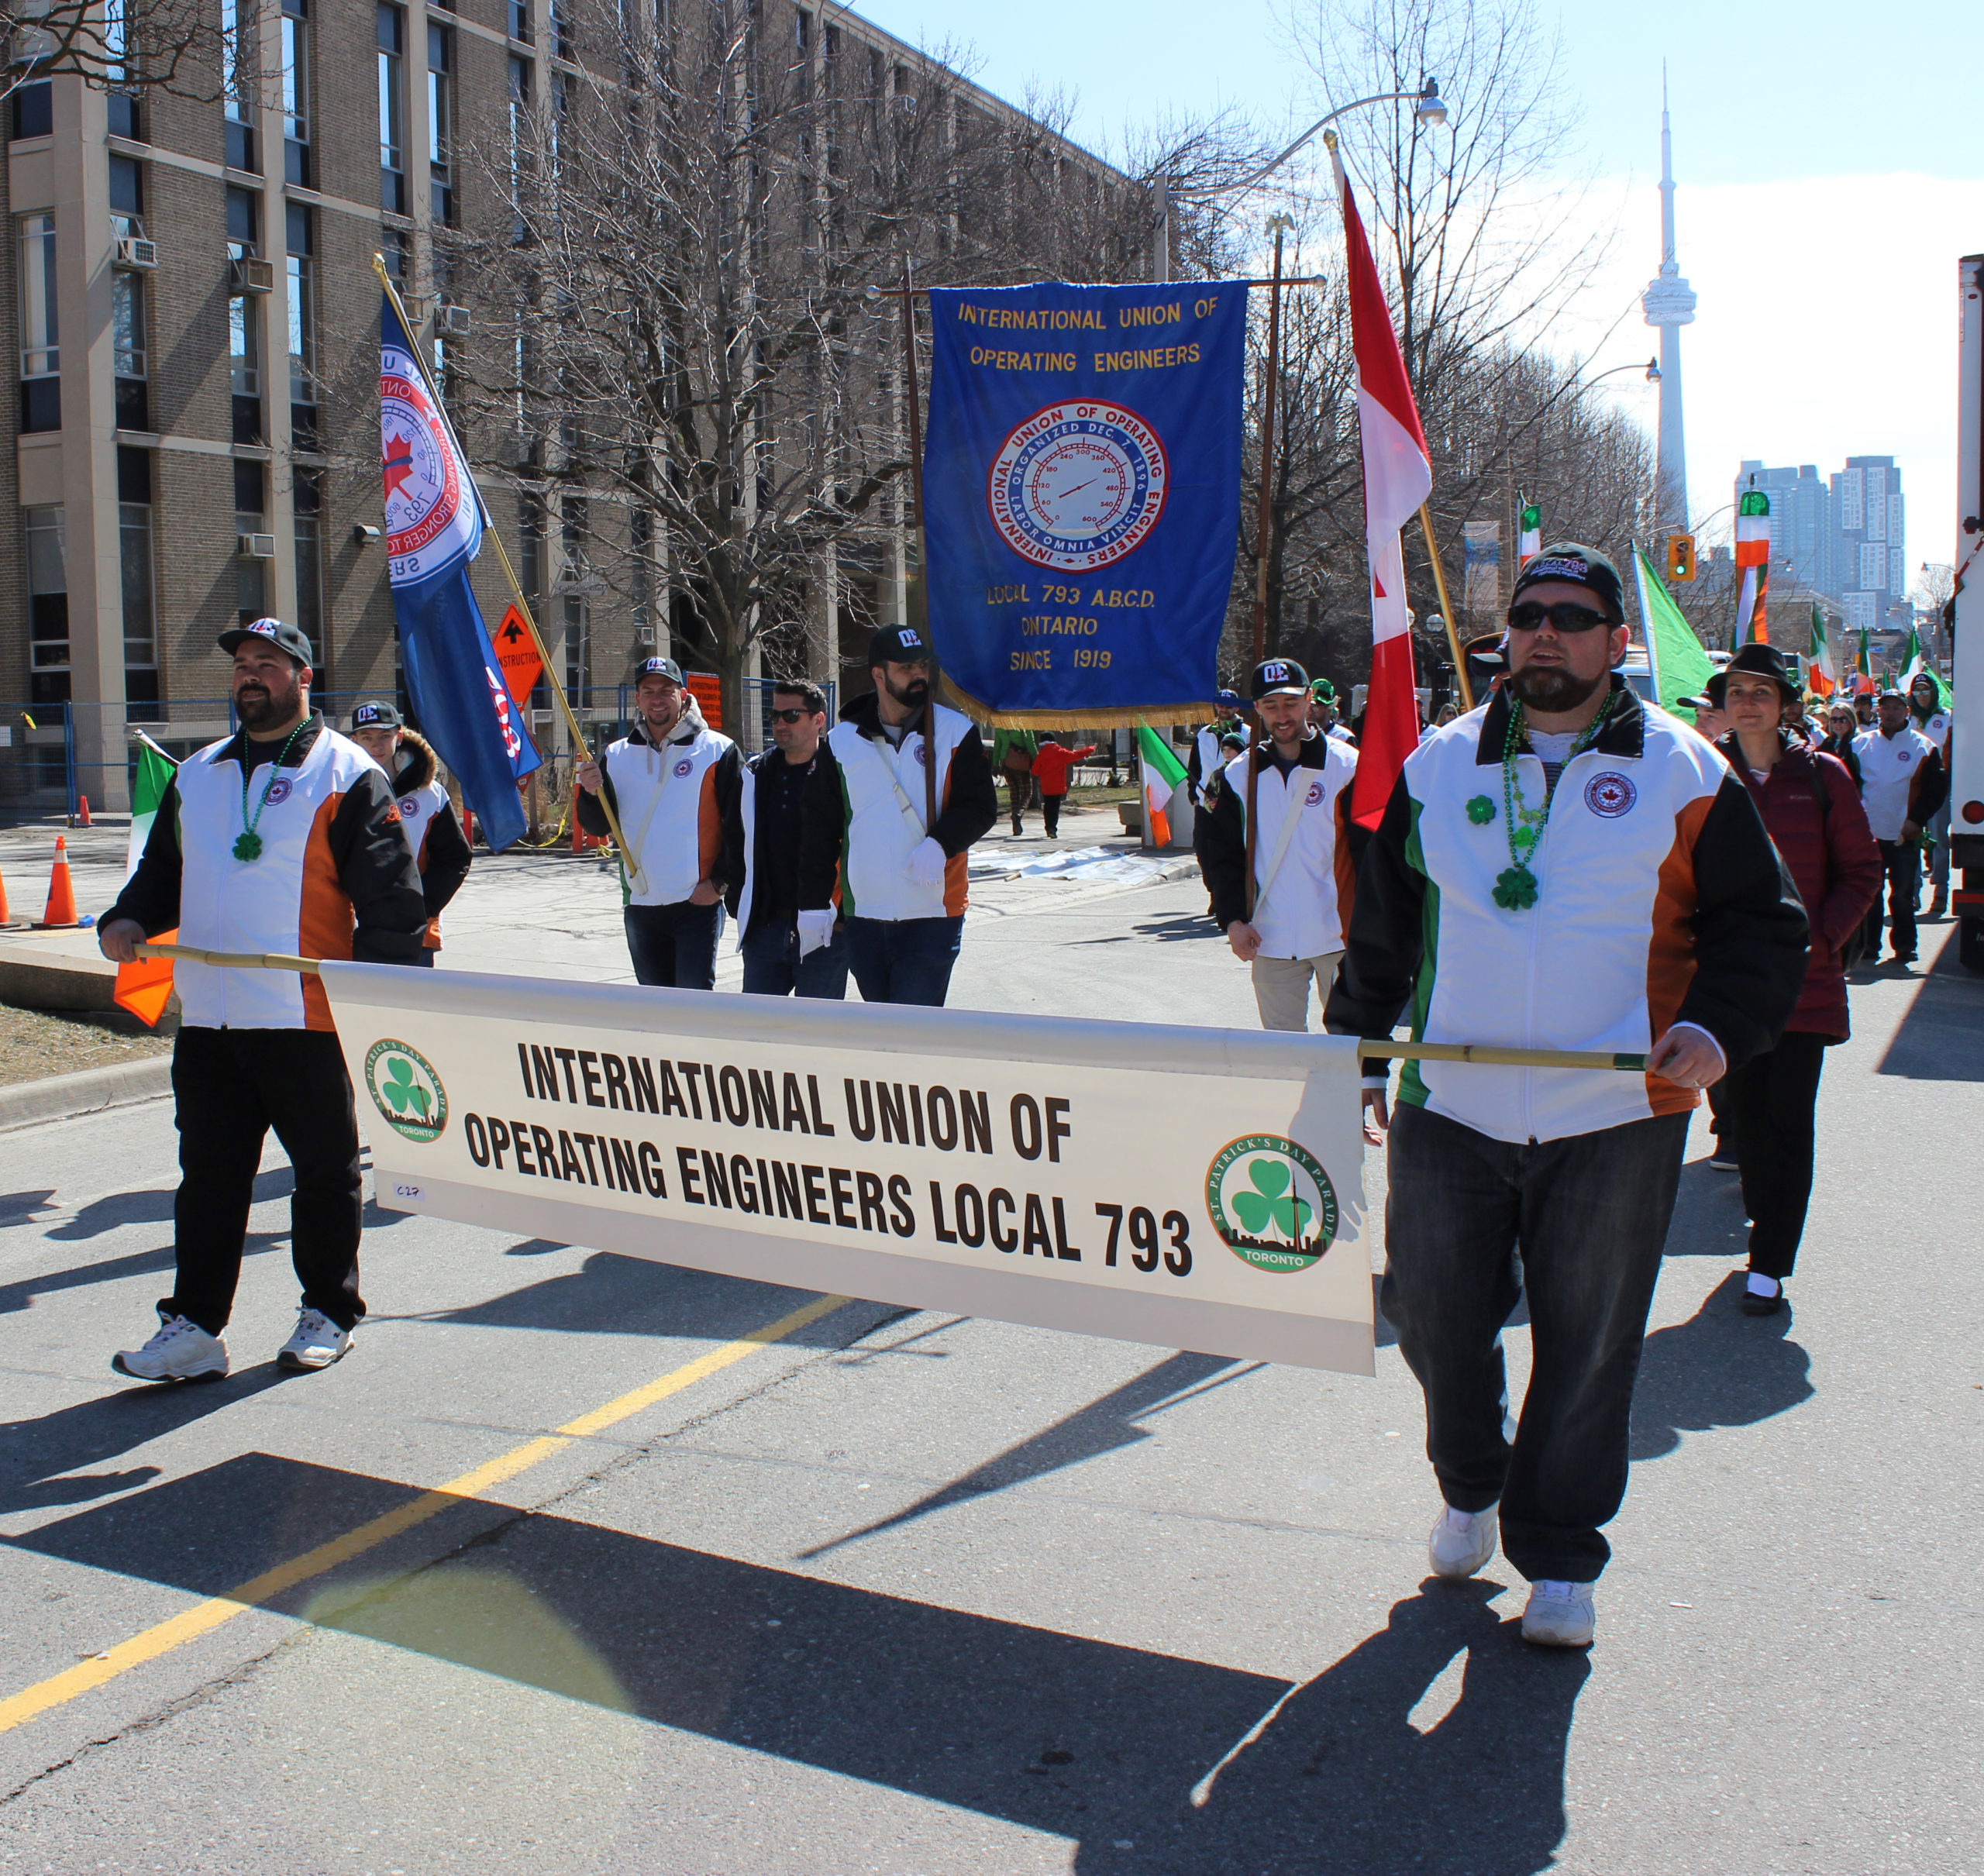 Local 793 on the parade route.